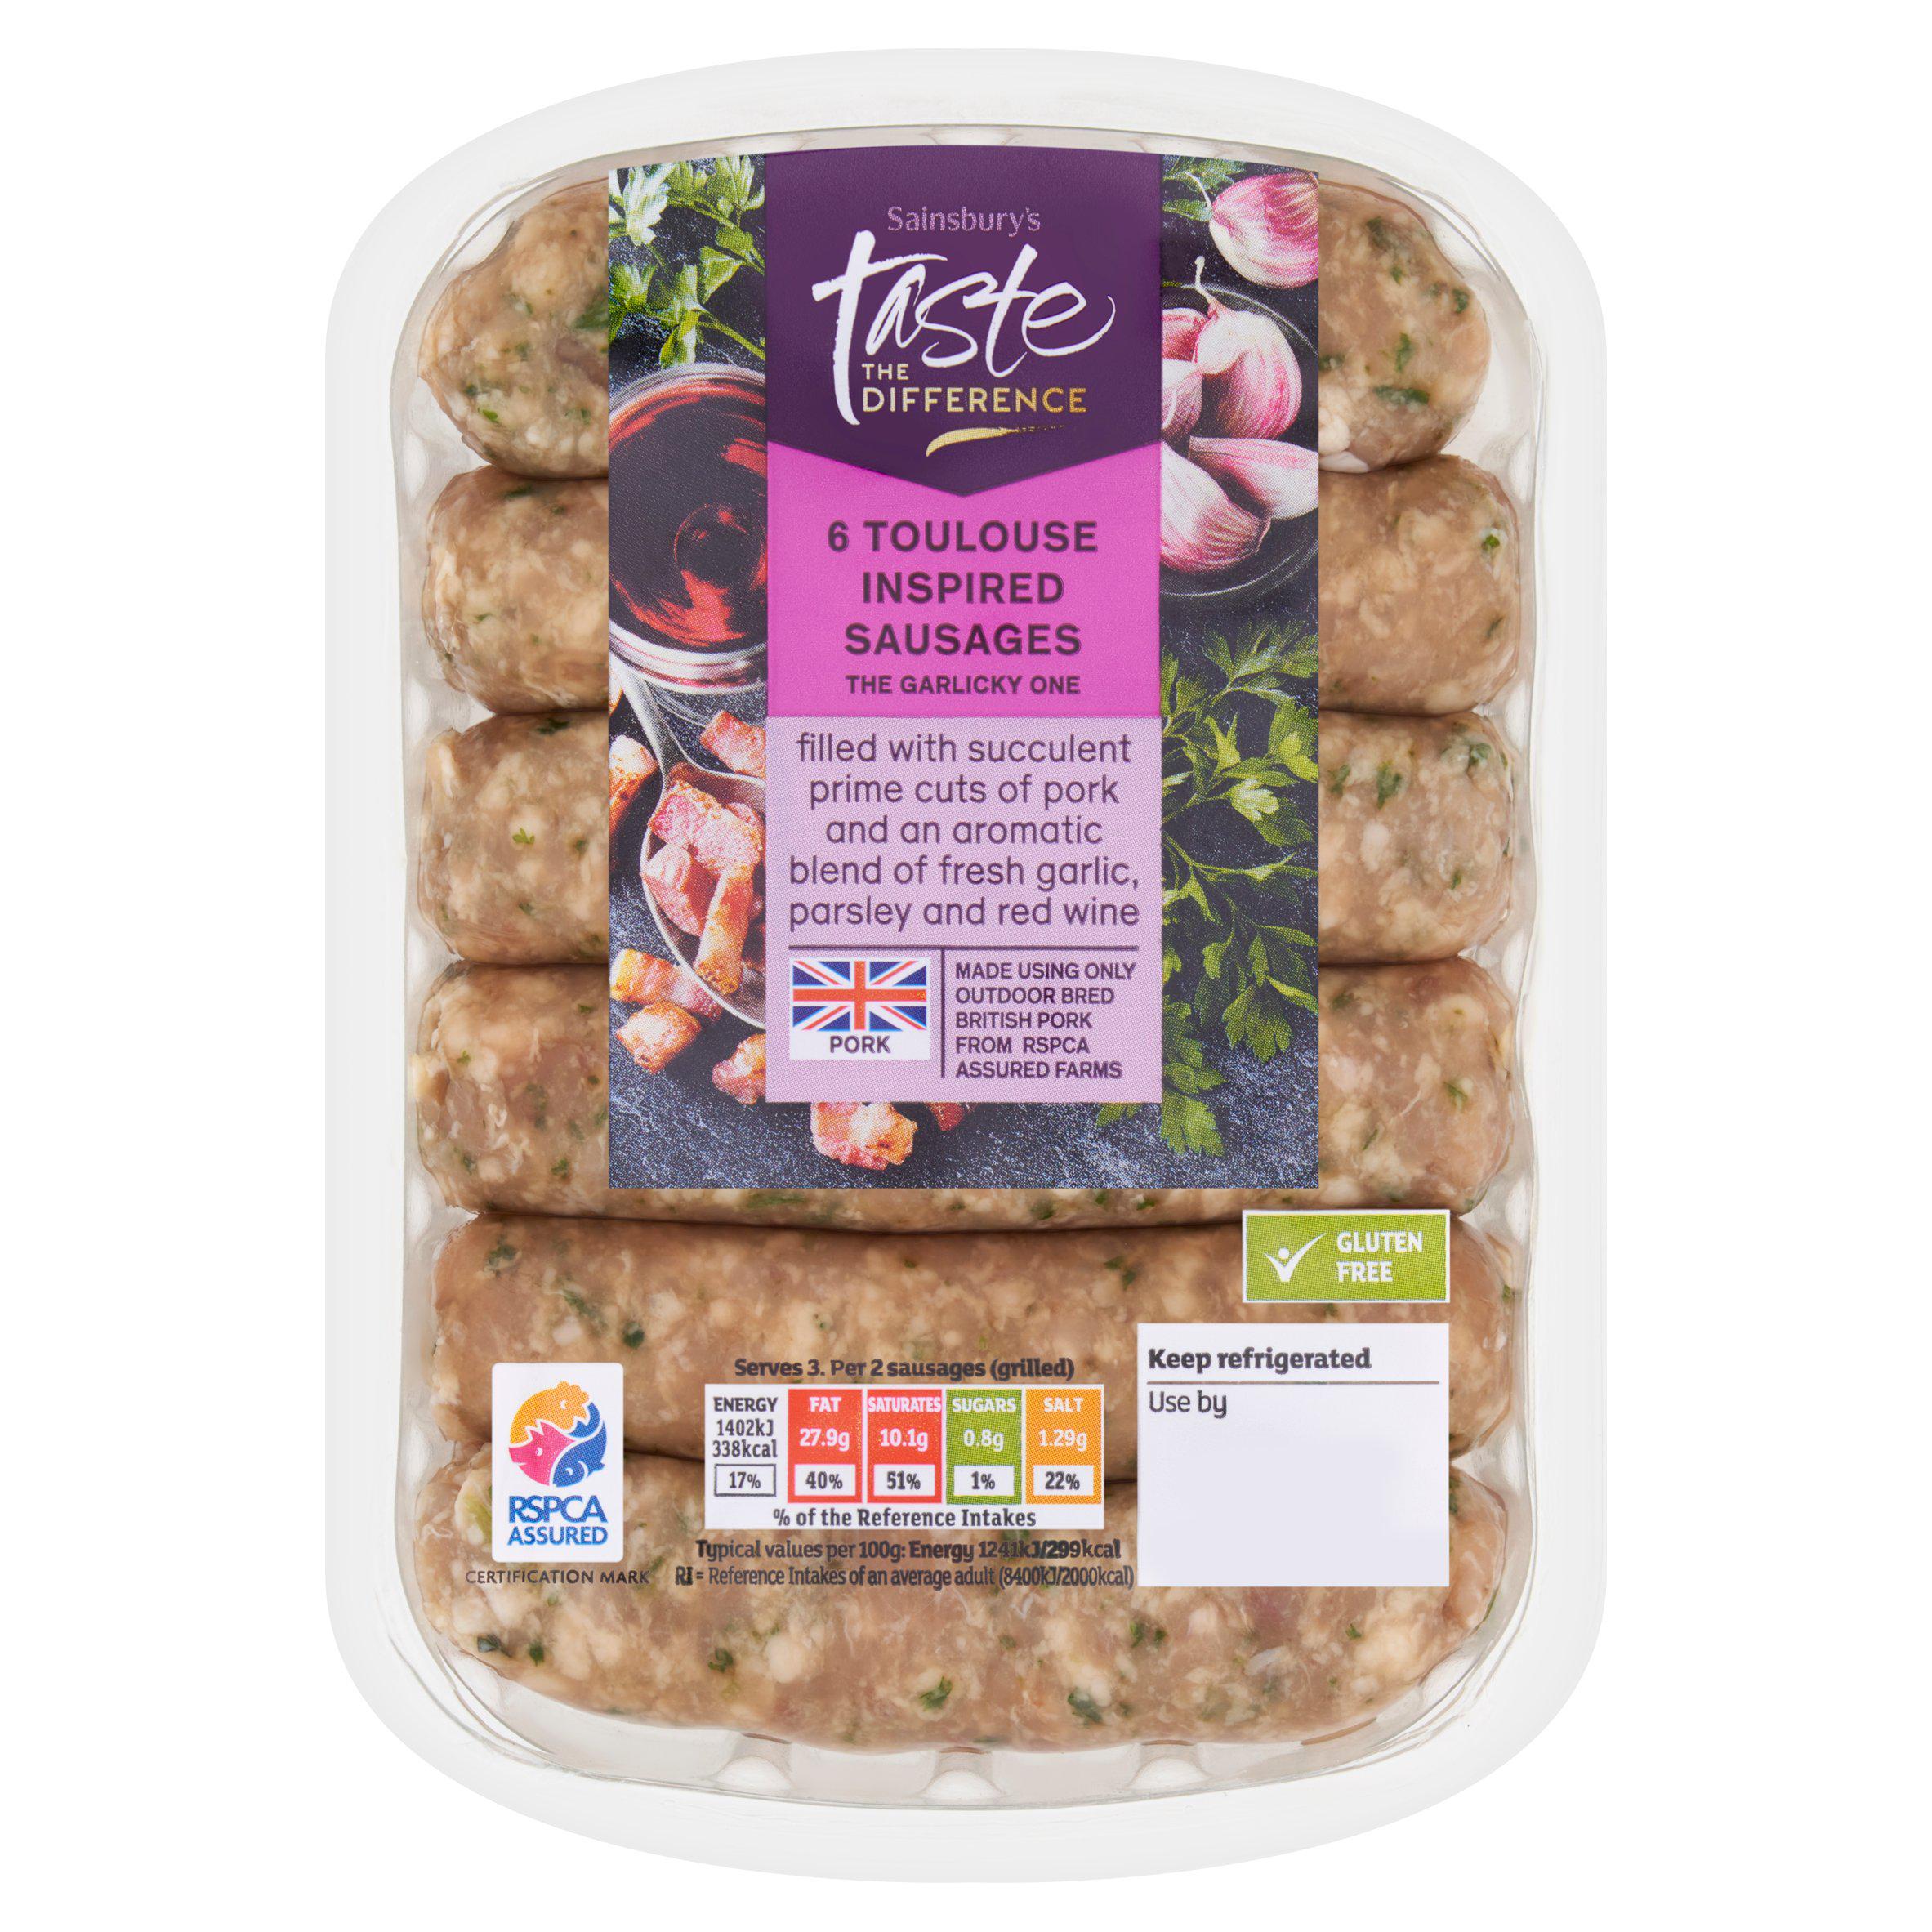 Sainsbury's Toulouse Inspired Sausages, Taste the Difference x6 400g